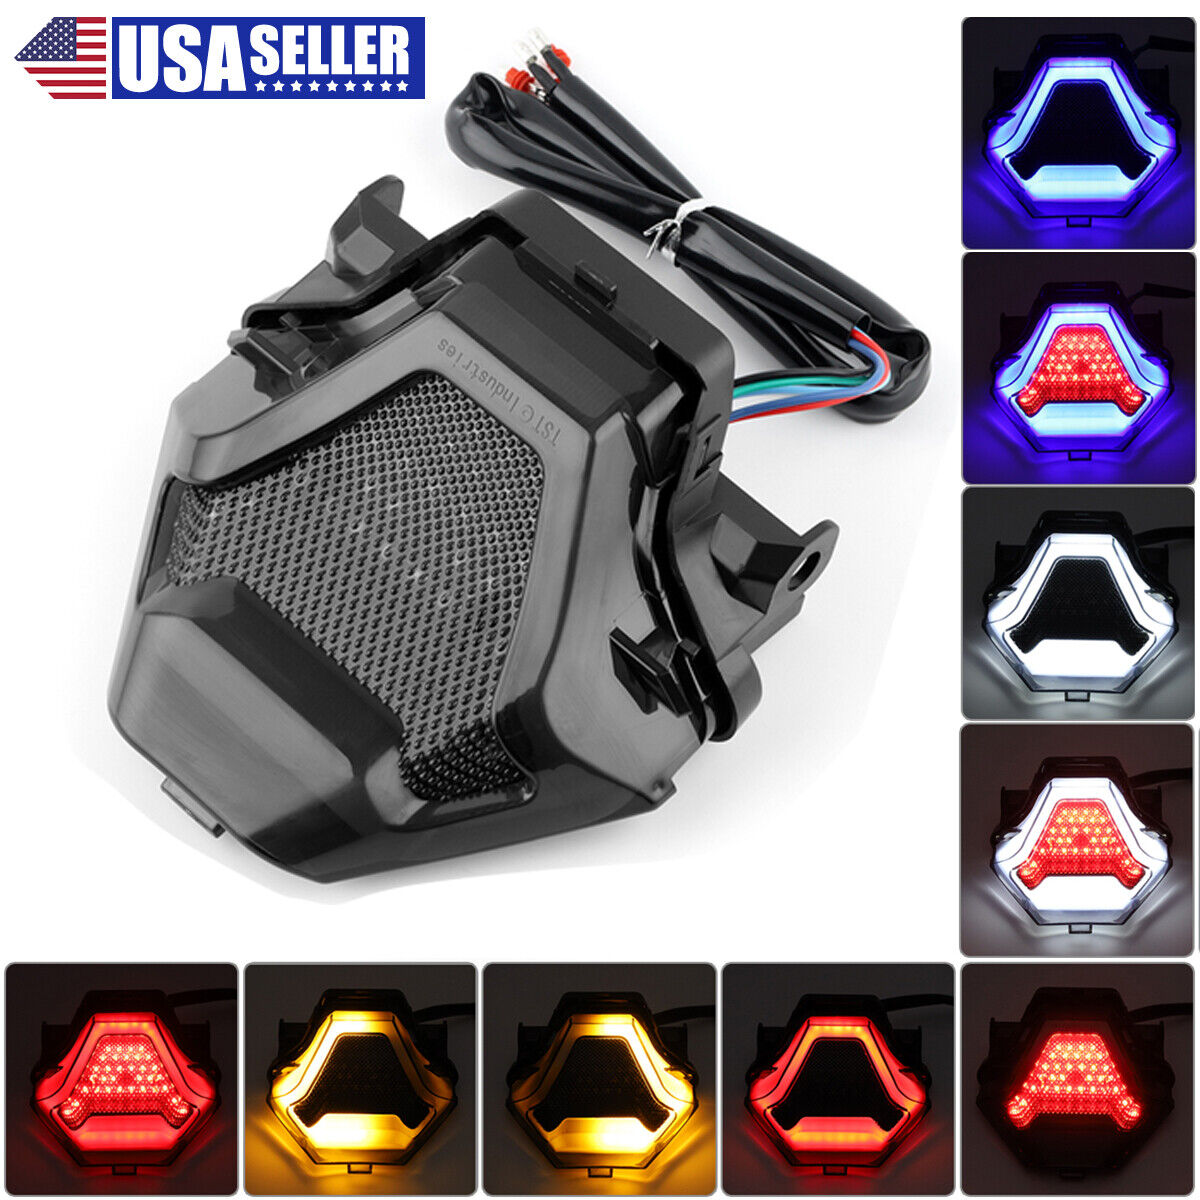 Integrated LED Tail Light Turn Signals Brake Lamp For YAMAHA YZF R3 R3 R25 Y15ZR